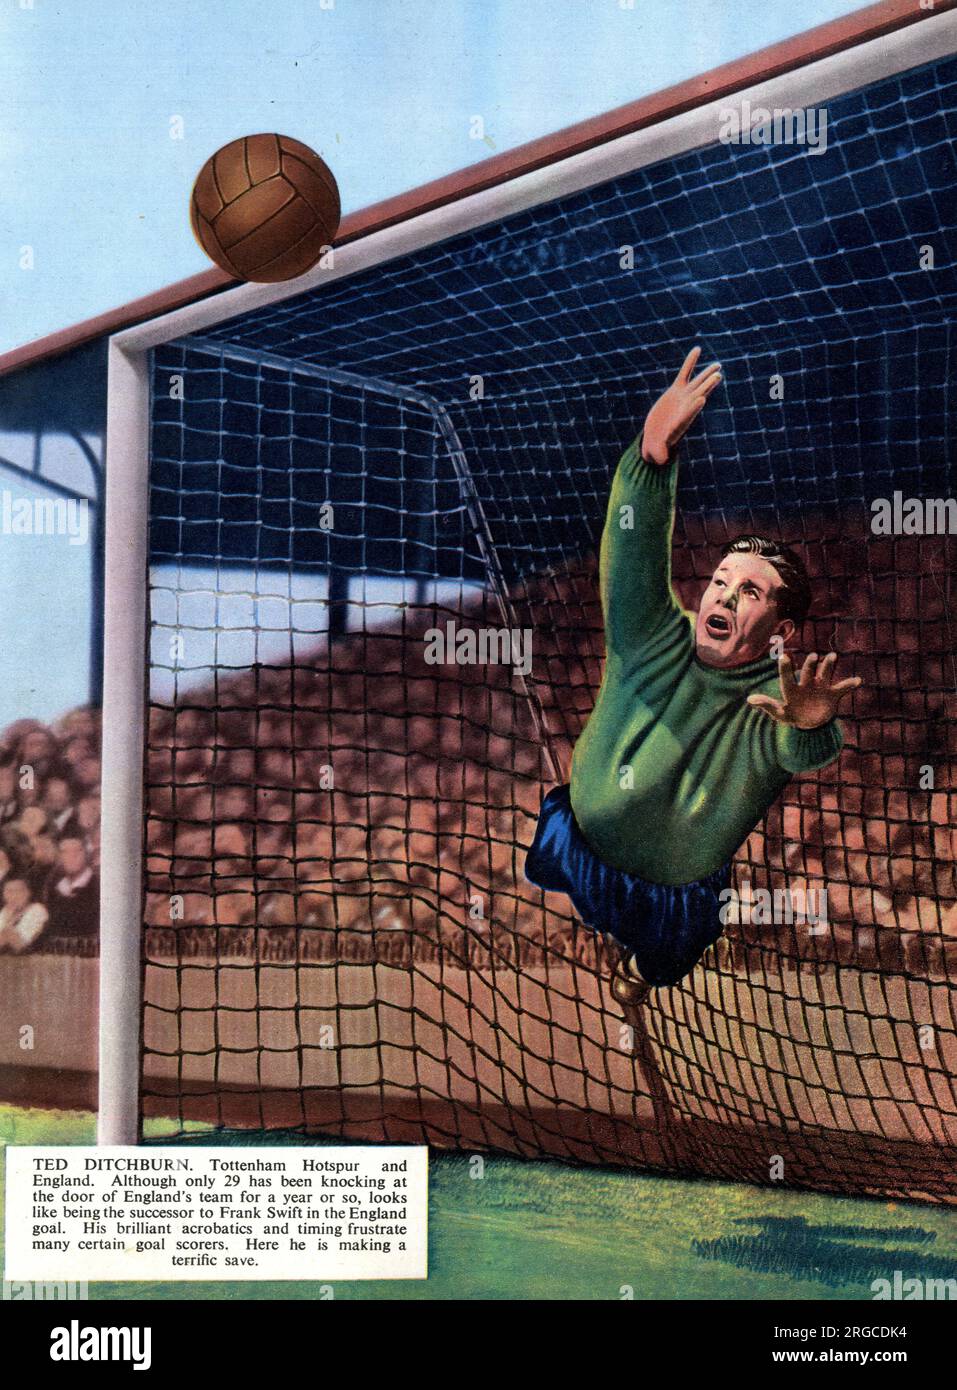 Ted Ditchburn, football goalkeeper for Tottenham Hotspur and England, making a save Stock Photo